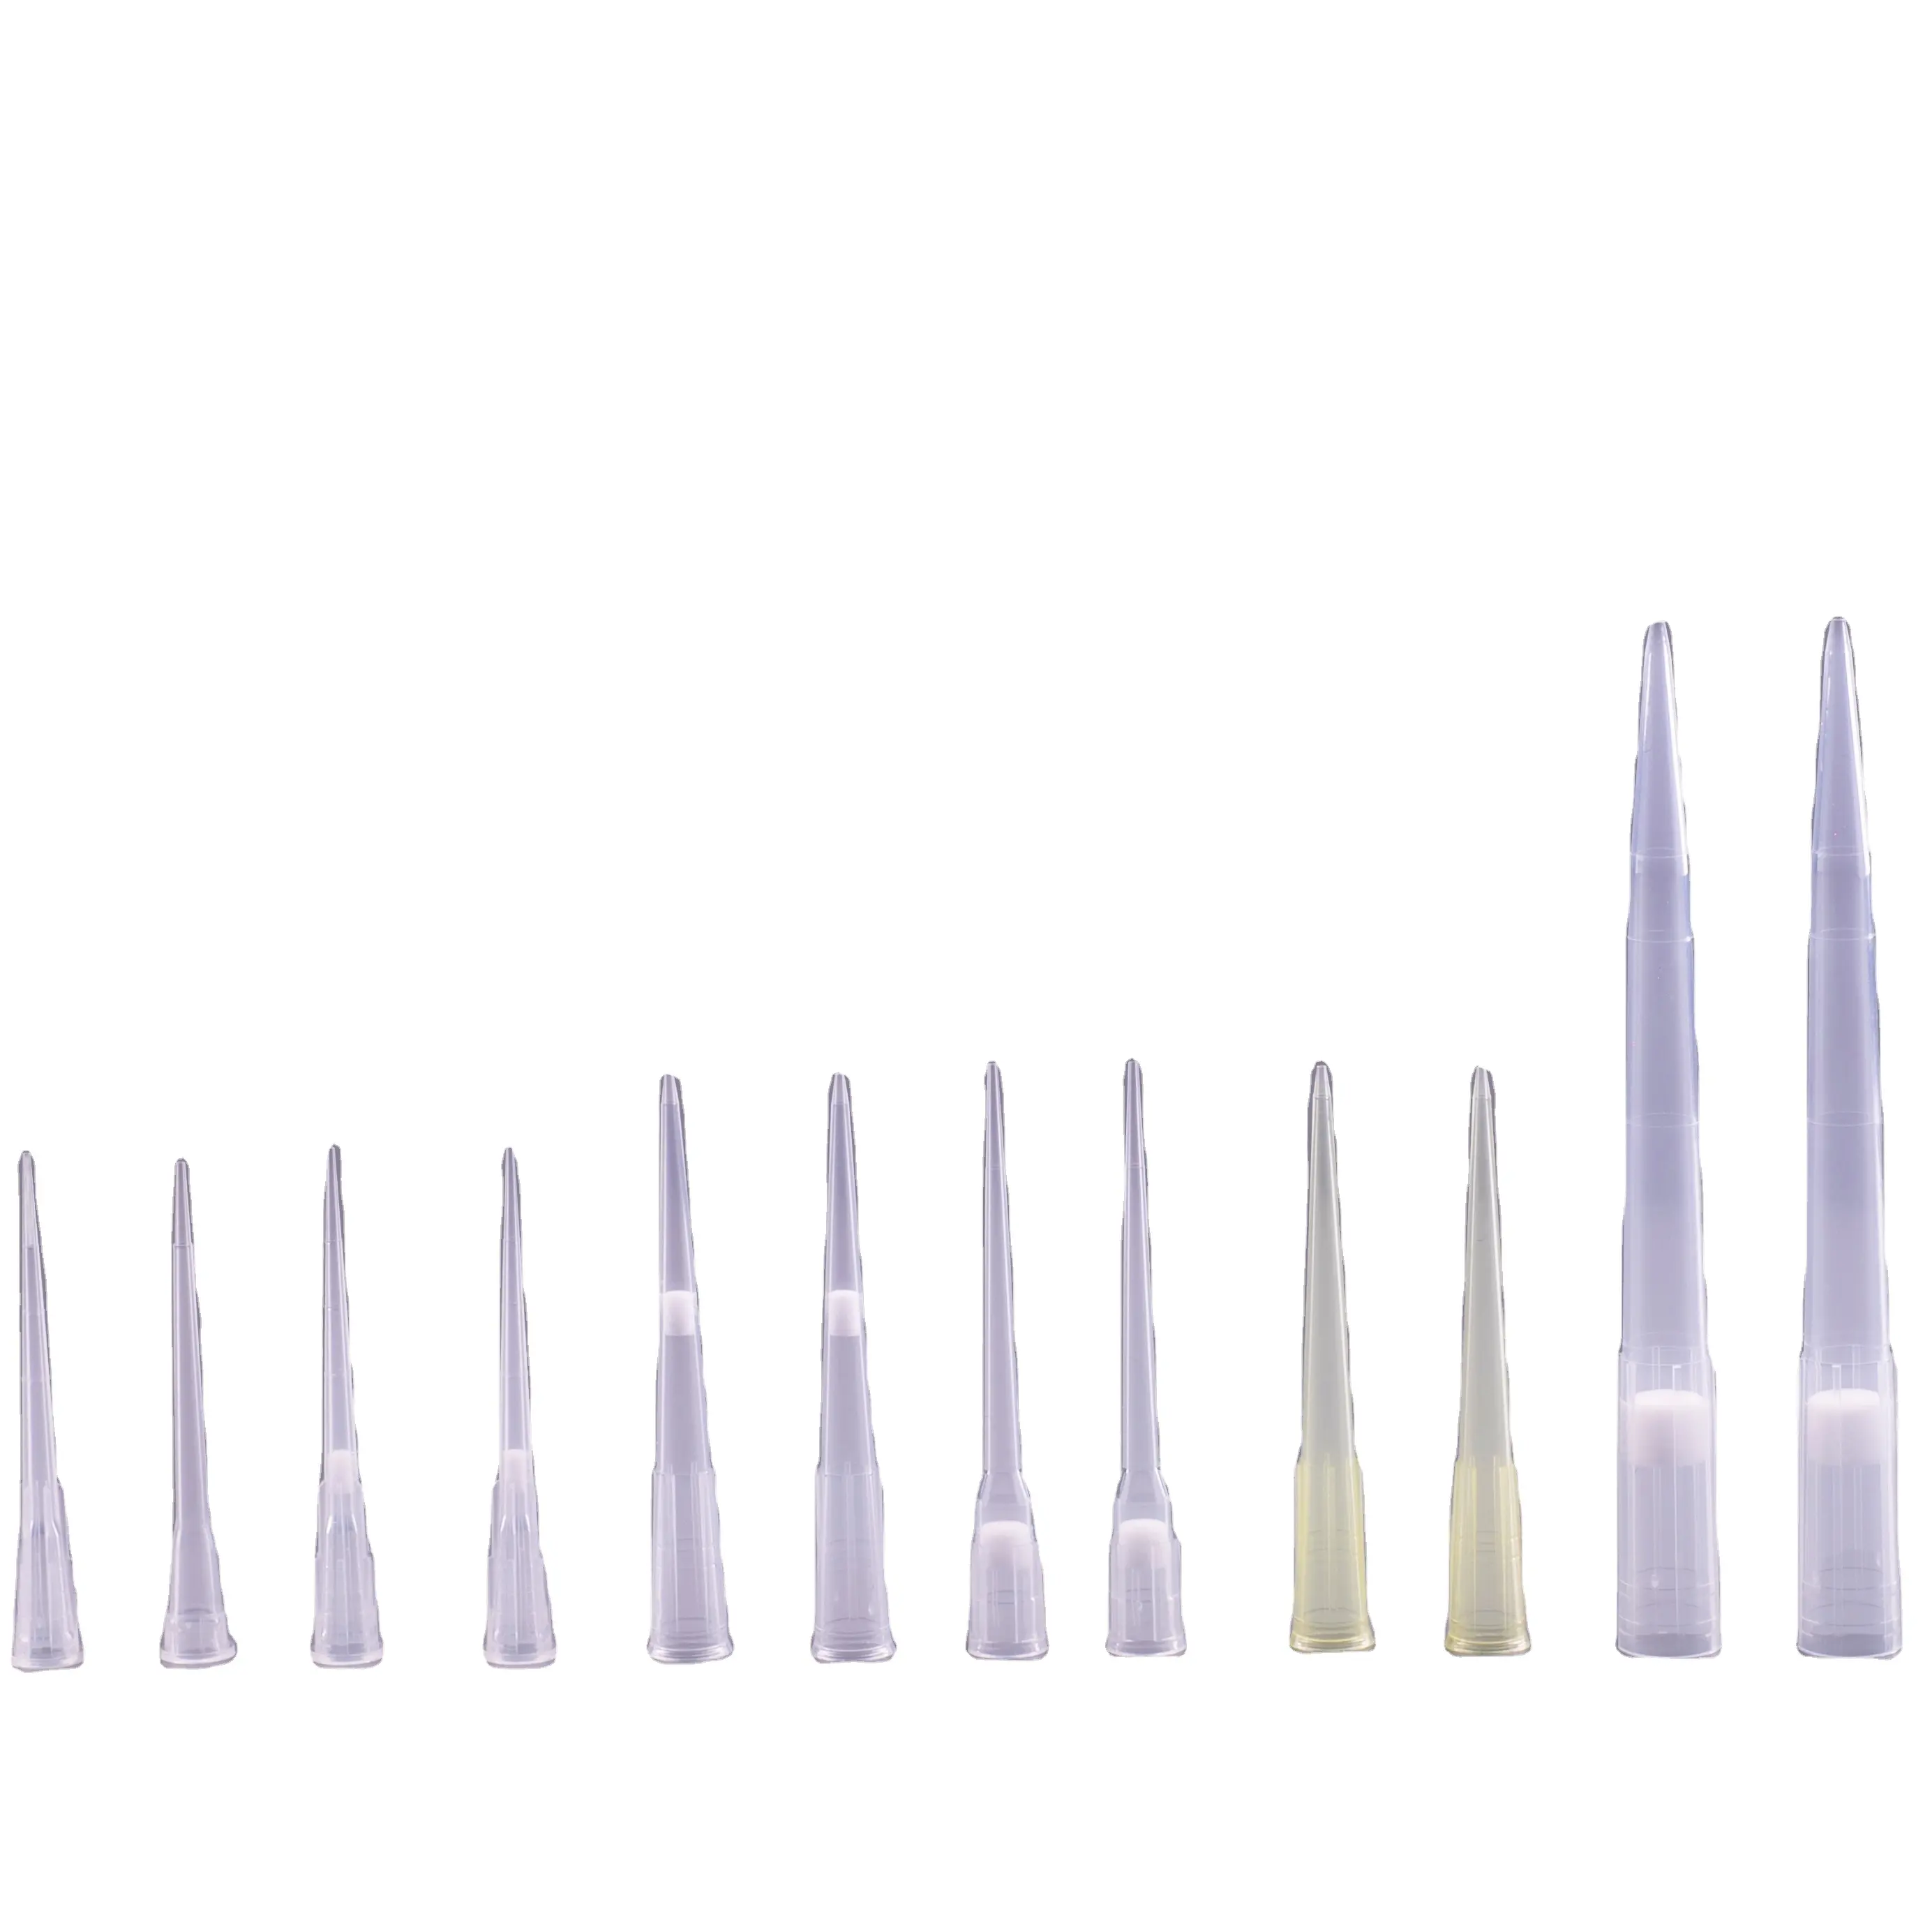 Lab Supplies Wholesale Dnase Rnase Free Universal Disposable Plastic Sterile pipette tips